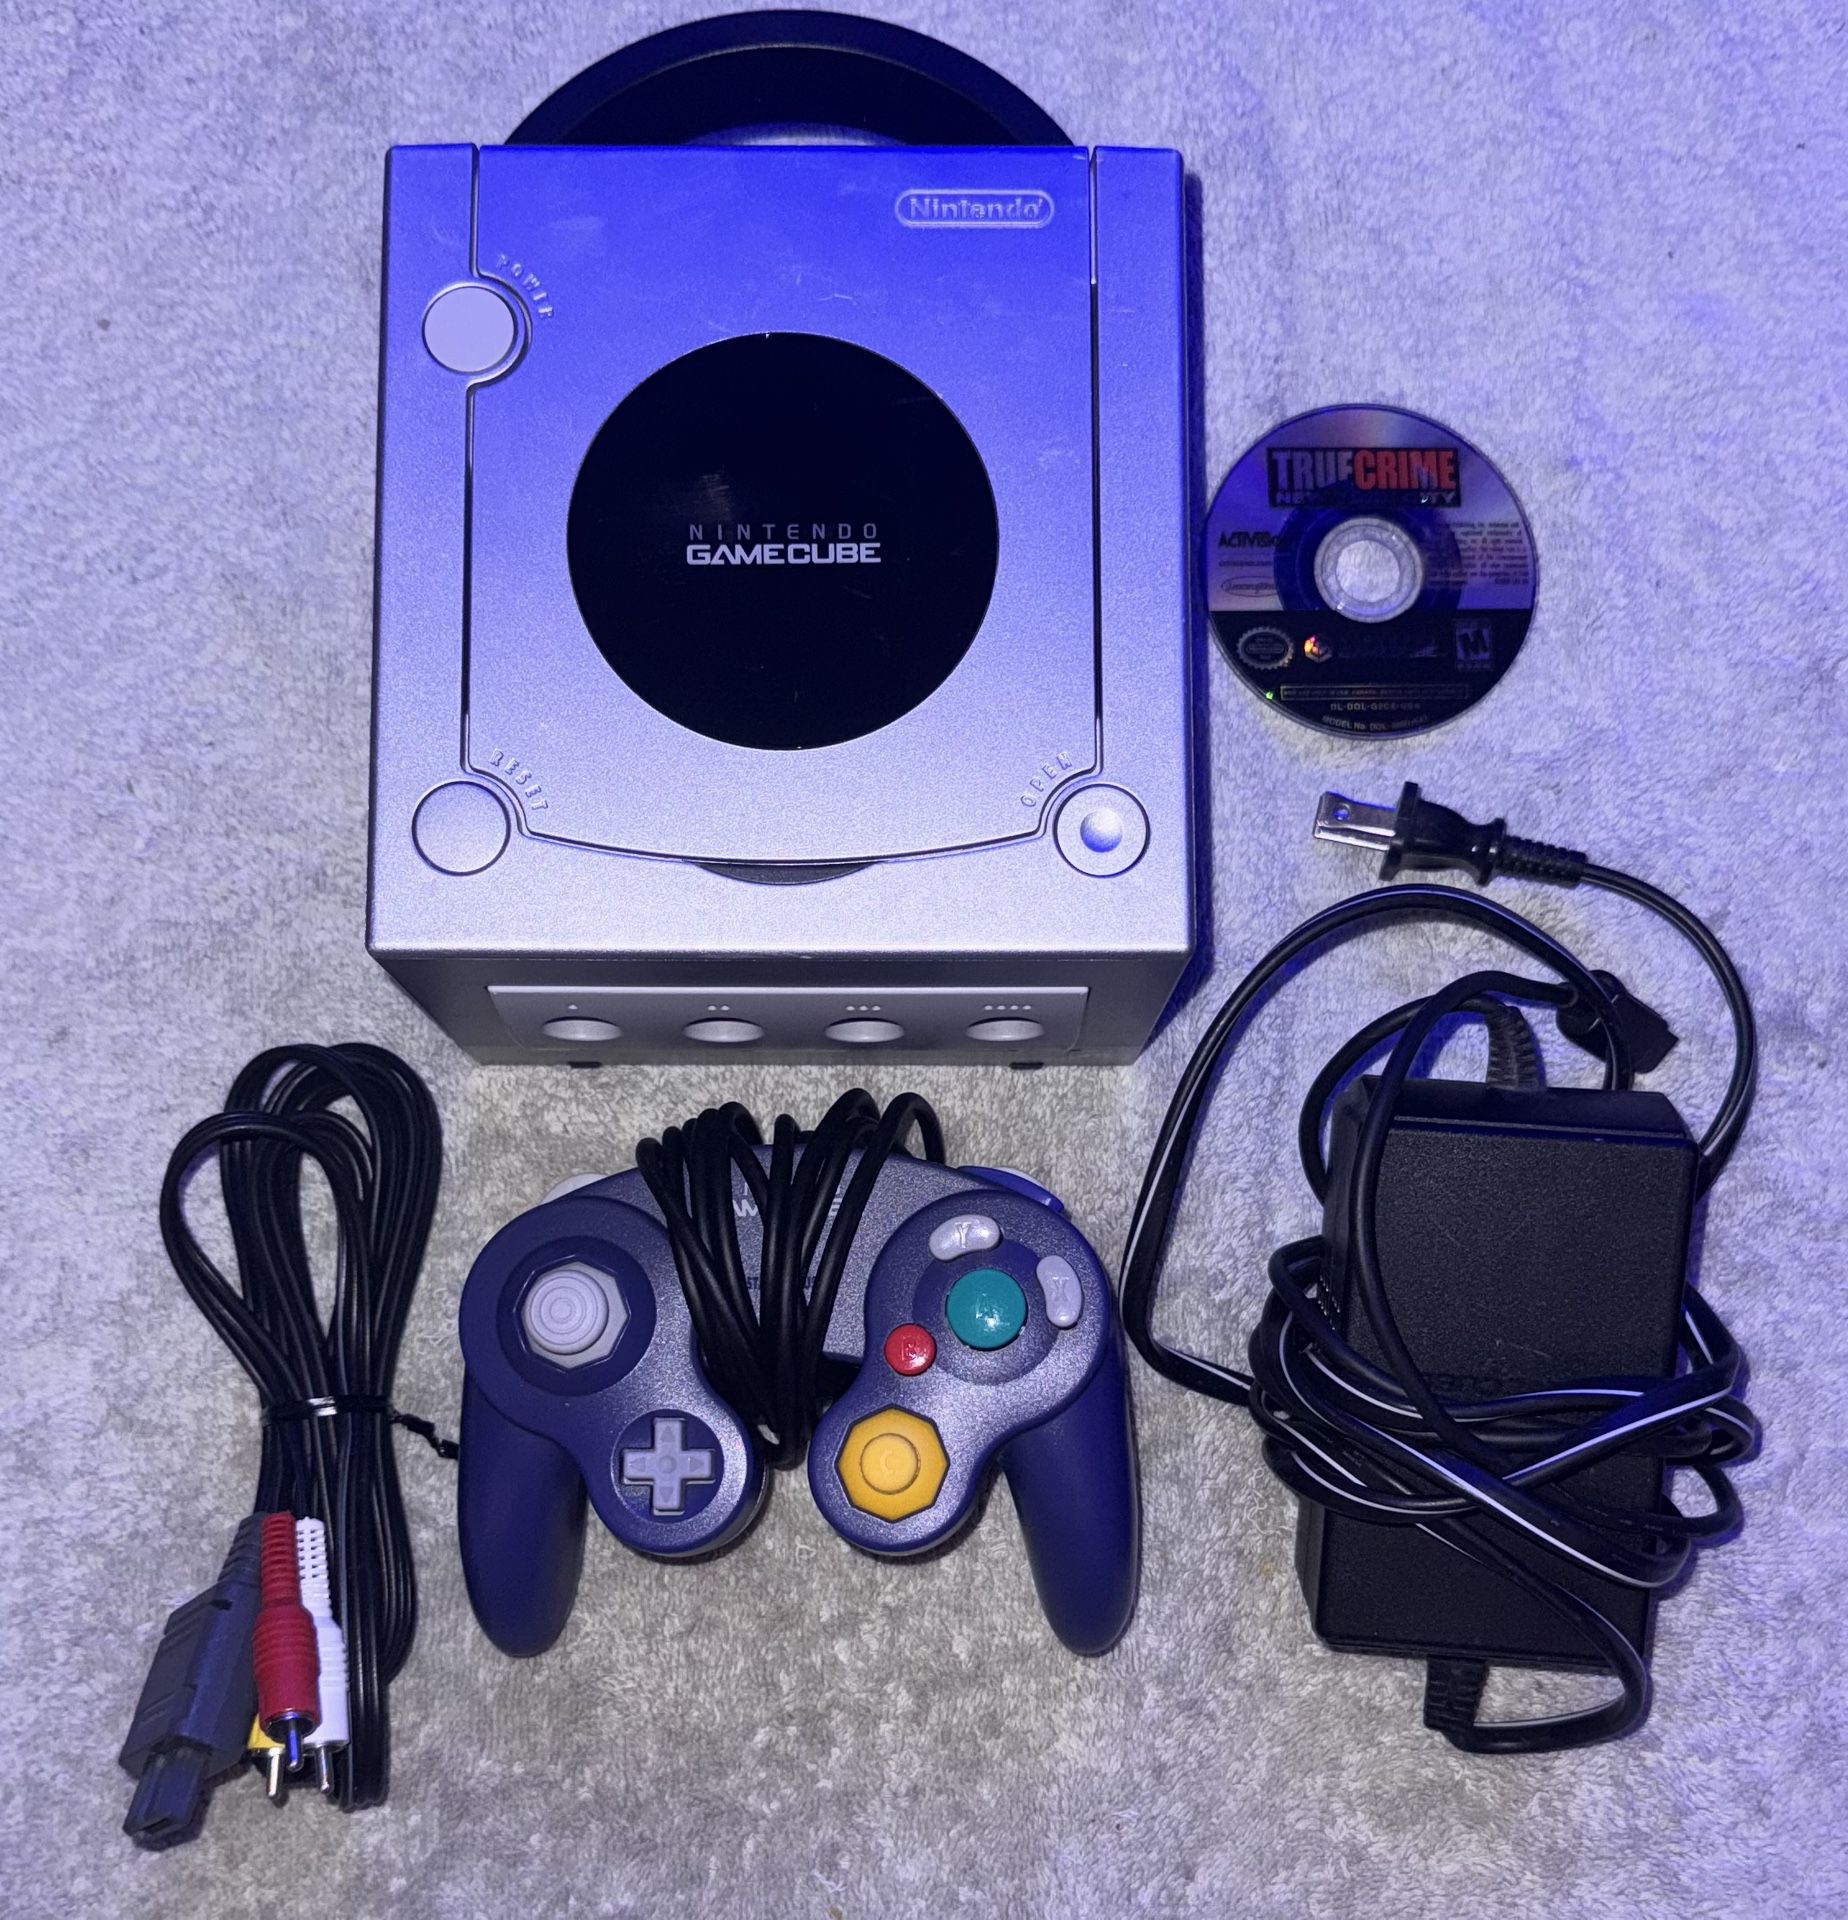 SILVER NINTENDO GAMECUBE CONSOLE WITH VIDEO GAME & CONTROLLER